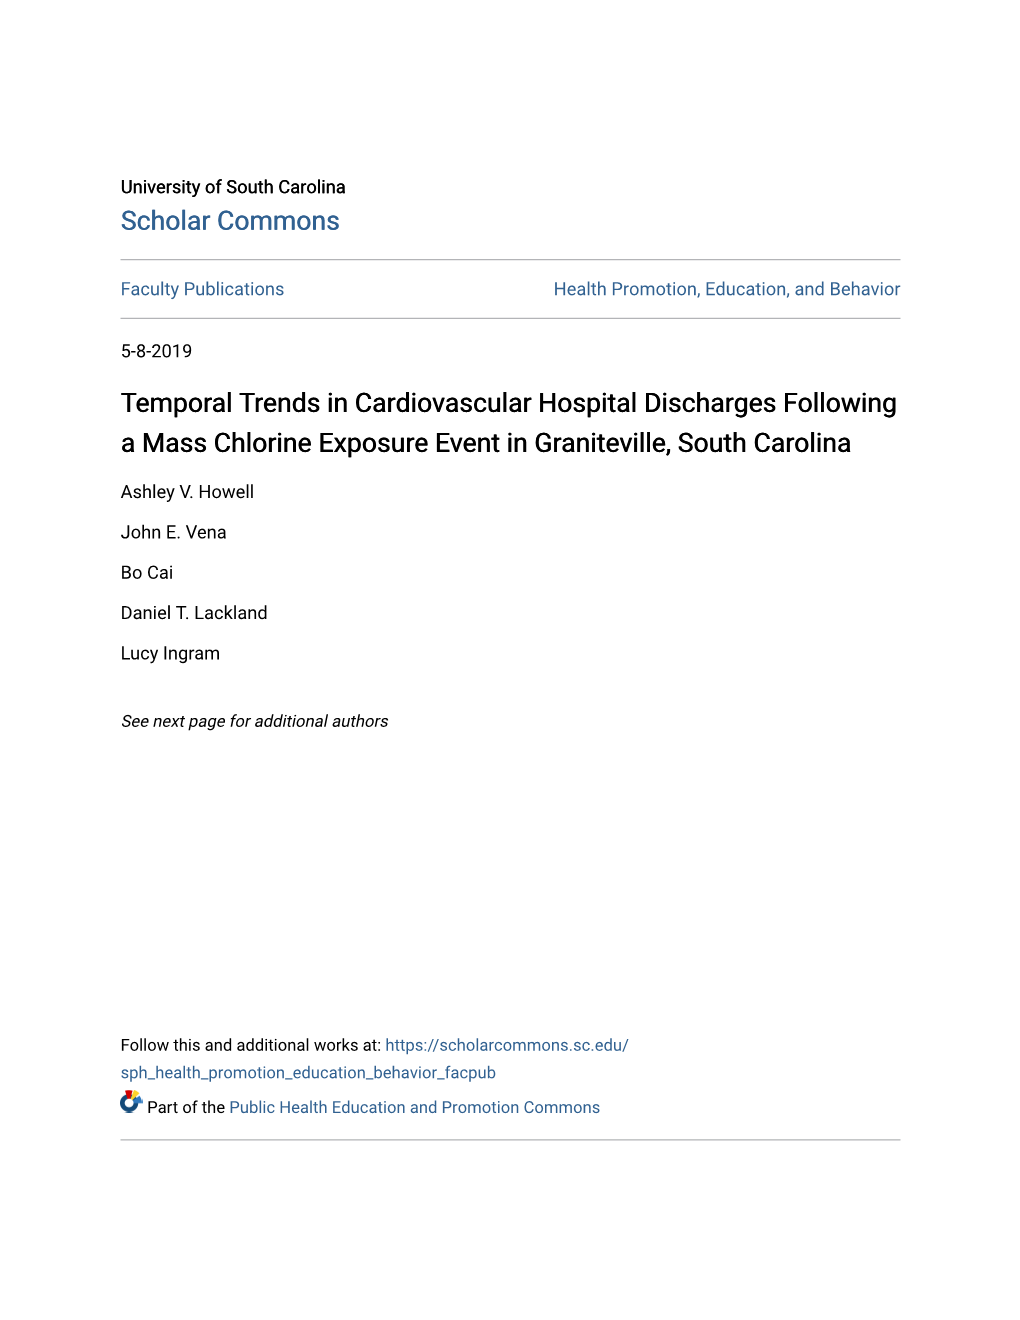 Temporal Trends in Cardiovascular Hospital Discharges Following a Mass Chlorine Exposure Event in Graniteville, South Carolina